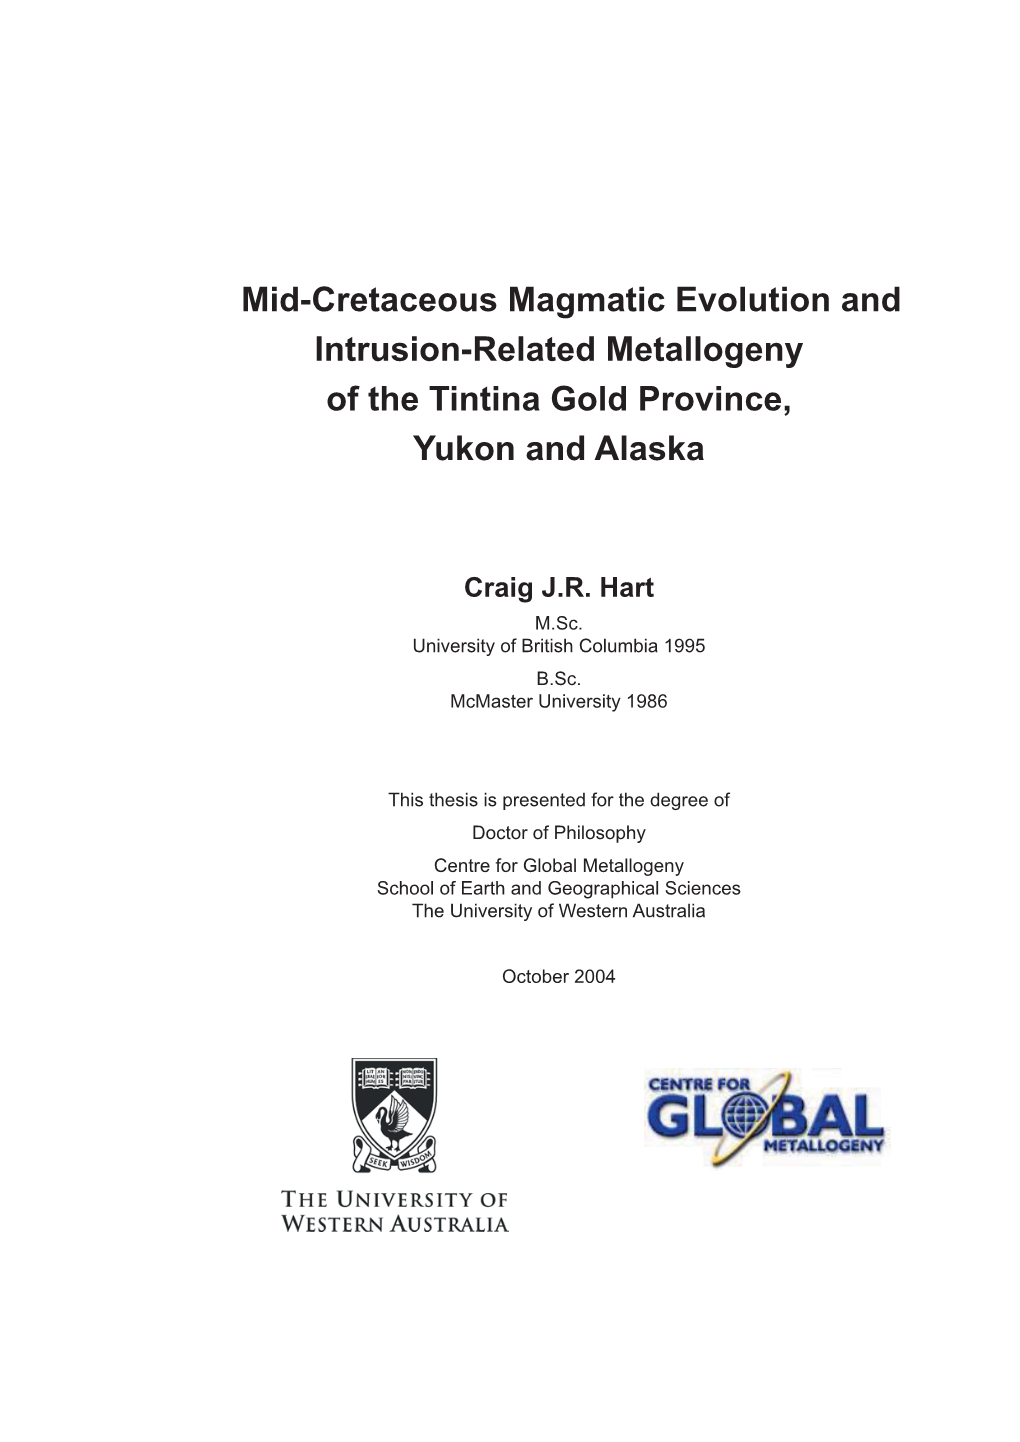 Mid-Cretaceous Magmatic Evolution and Intrusion-Related Metallogeny of the Tintina Gold Province, Yukon and Alaska